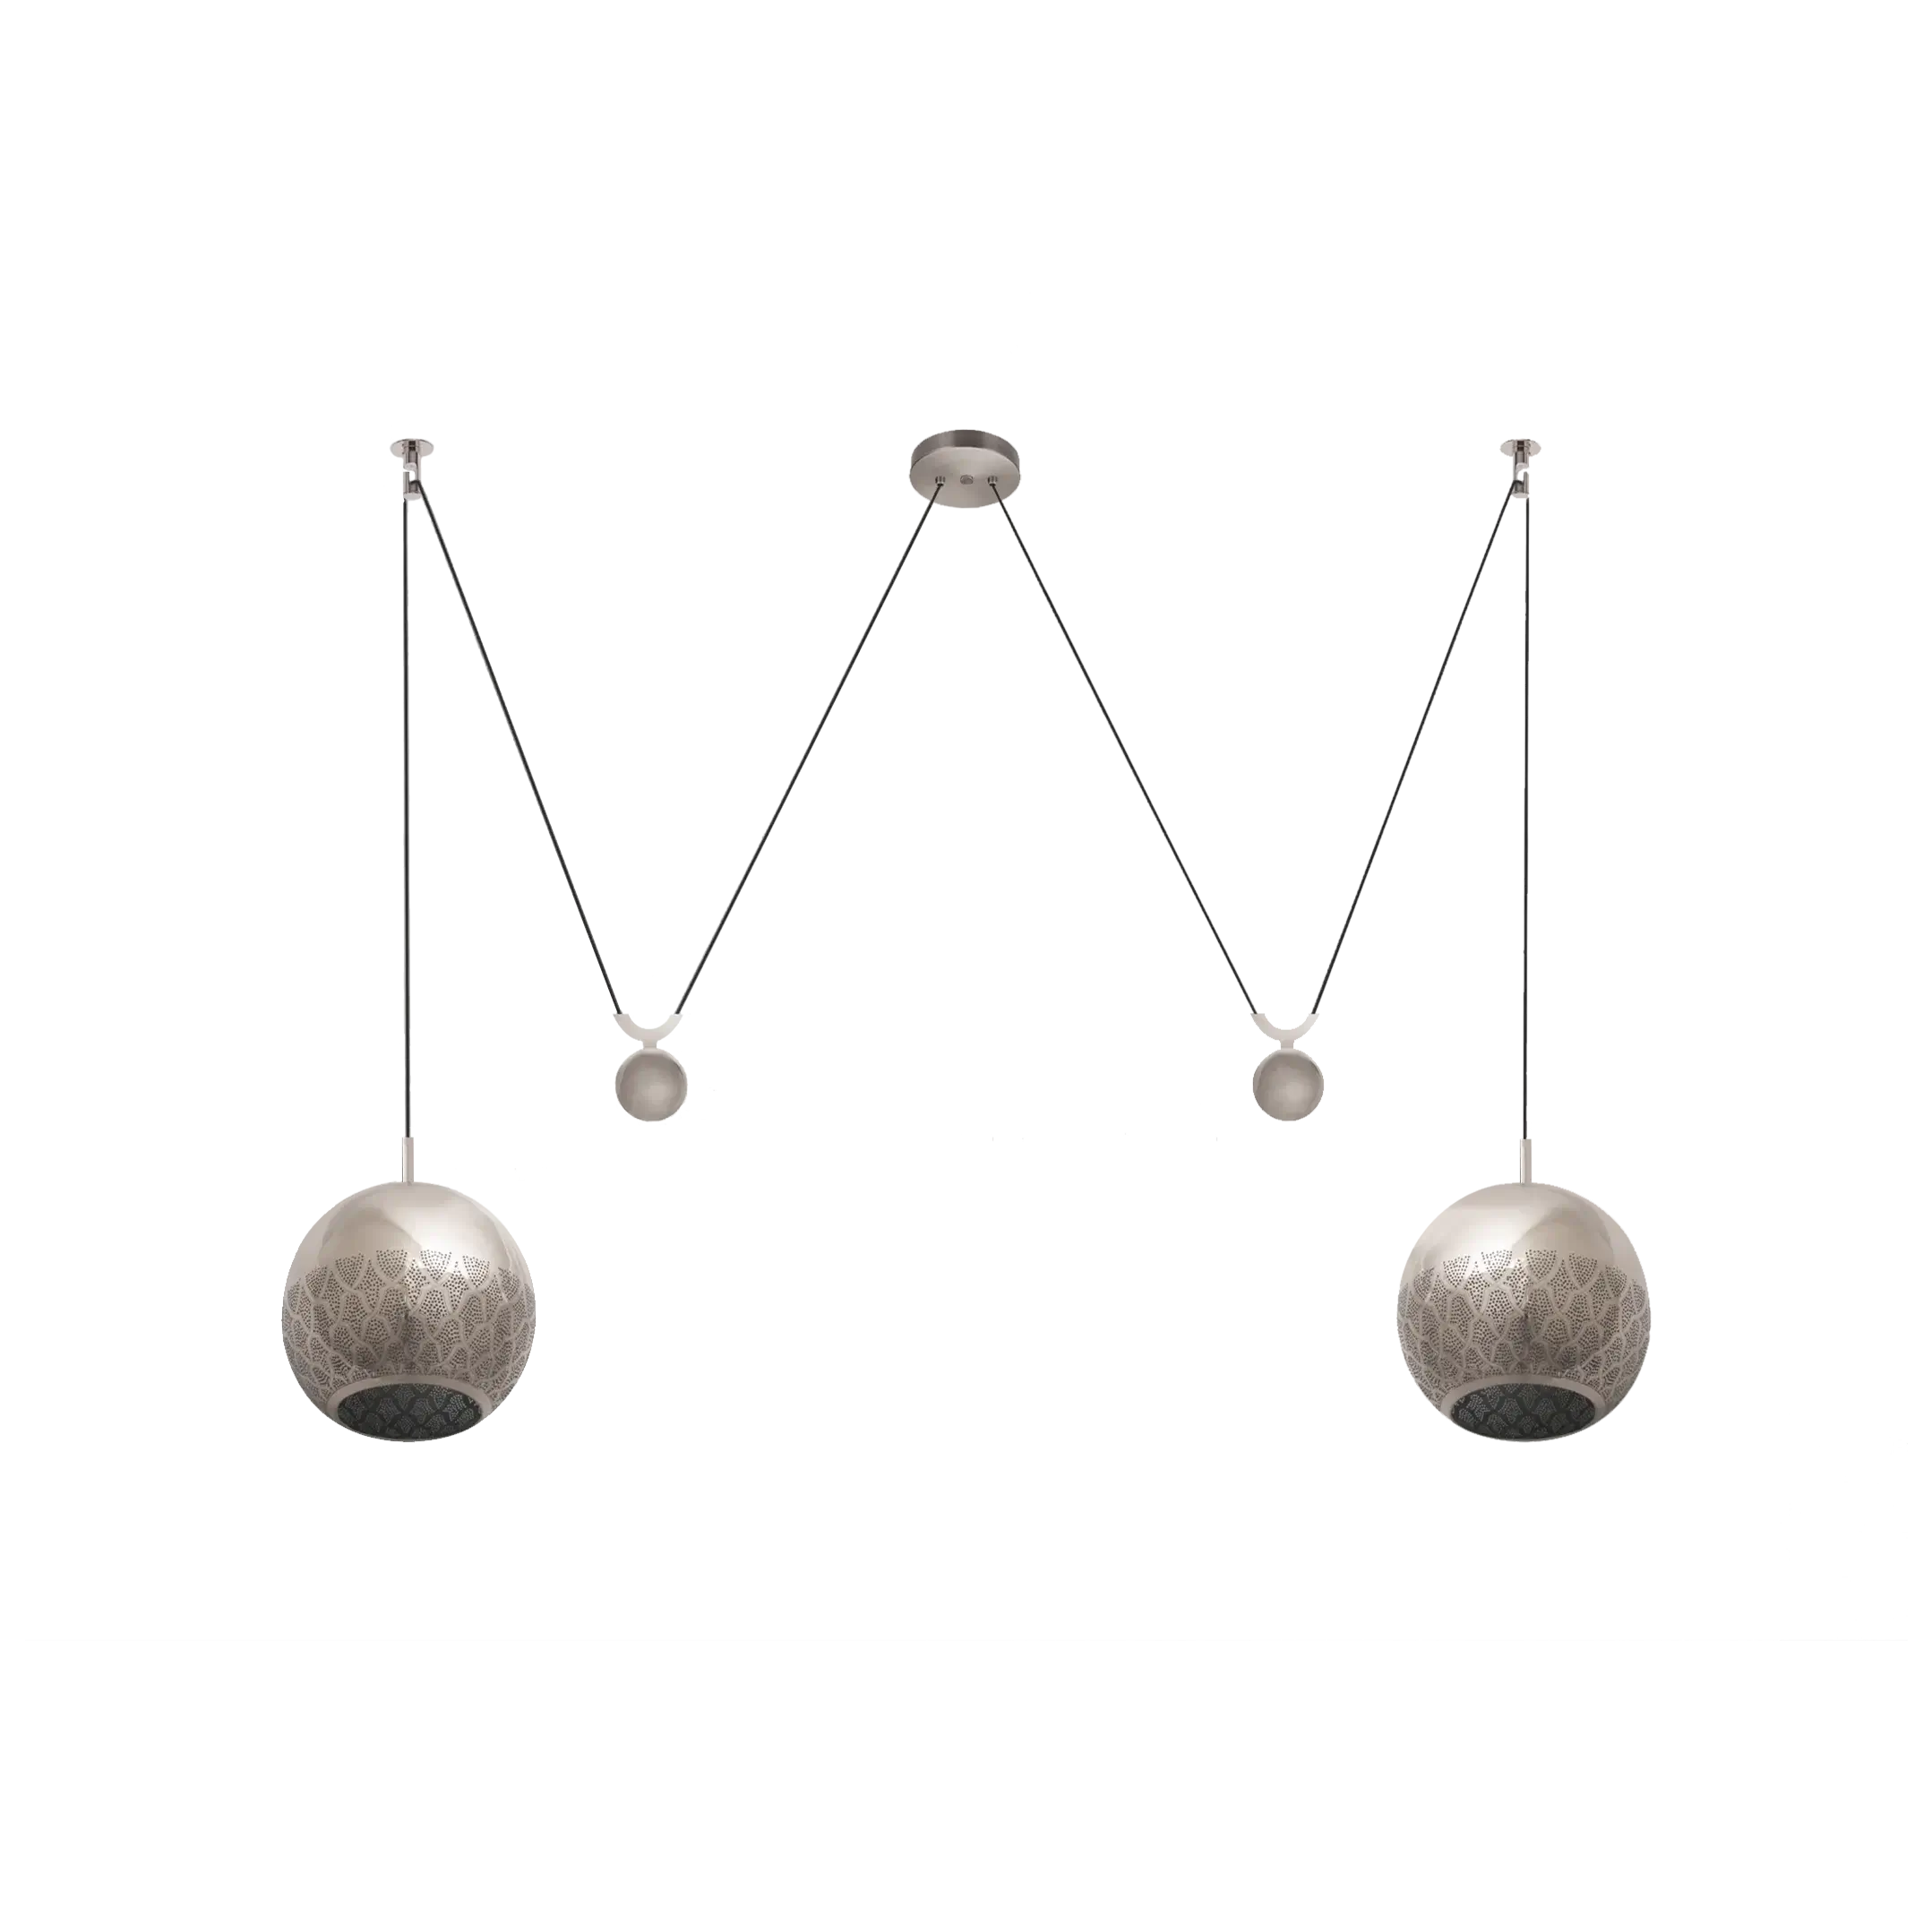 Dounia home Pendant light in nickel silver   made of Metal, Model: Nur reversed DOUBLE CONTERBALANCE